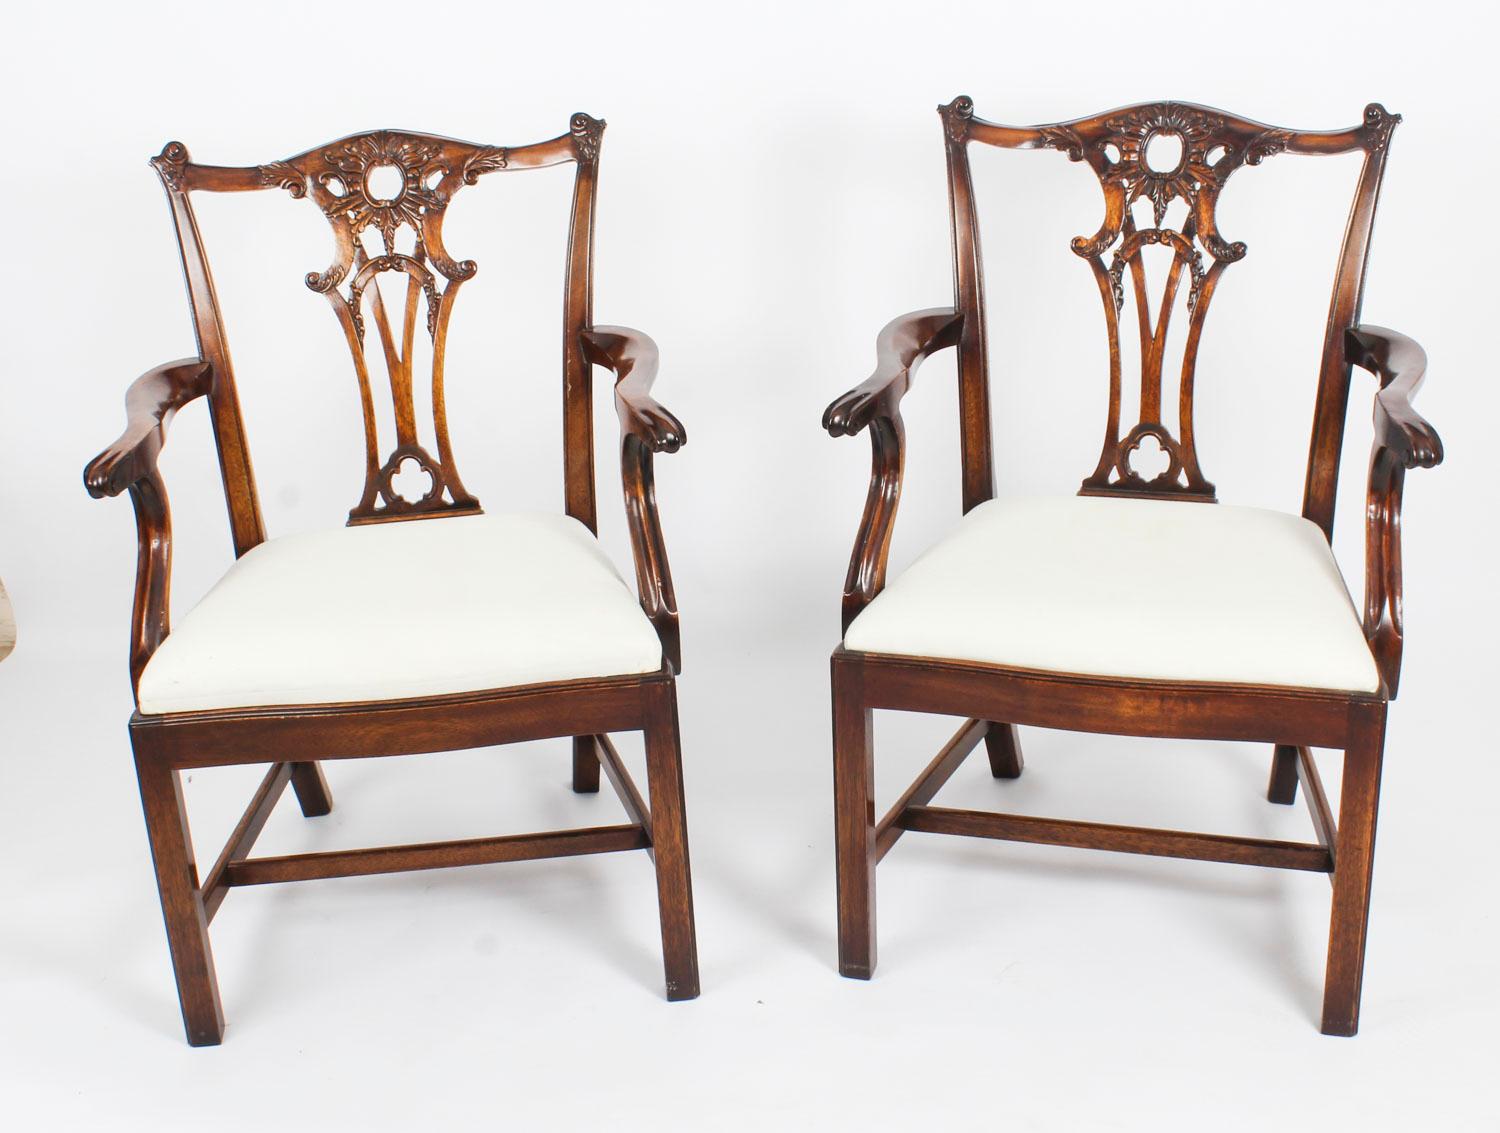 A superb vintage set of ten Chippendale Revival carved mahogany open armchairs, dating from the mid-20th century.

They have been crafted from hand carved solid mahogany, each with a pierced splat back, drop in seats and raised on square cut